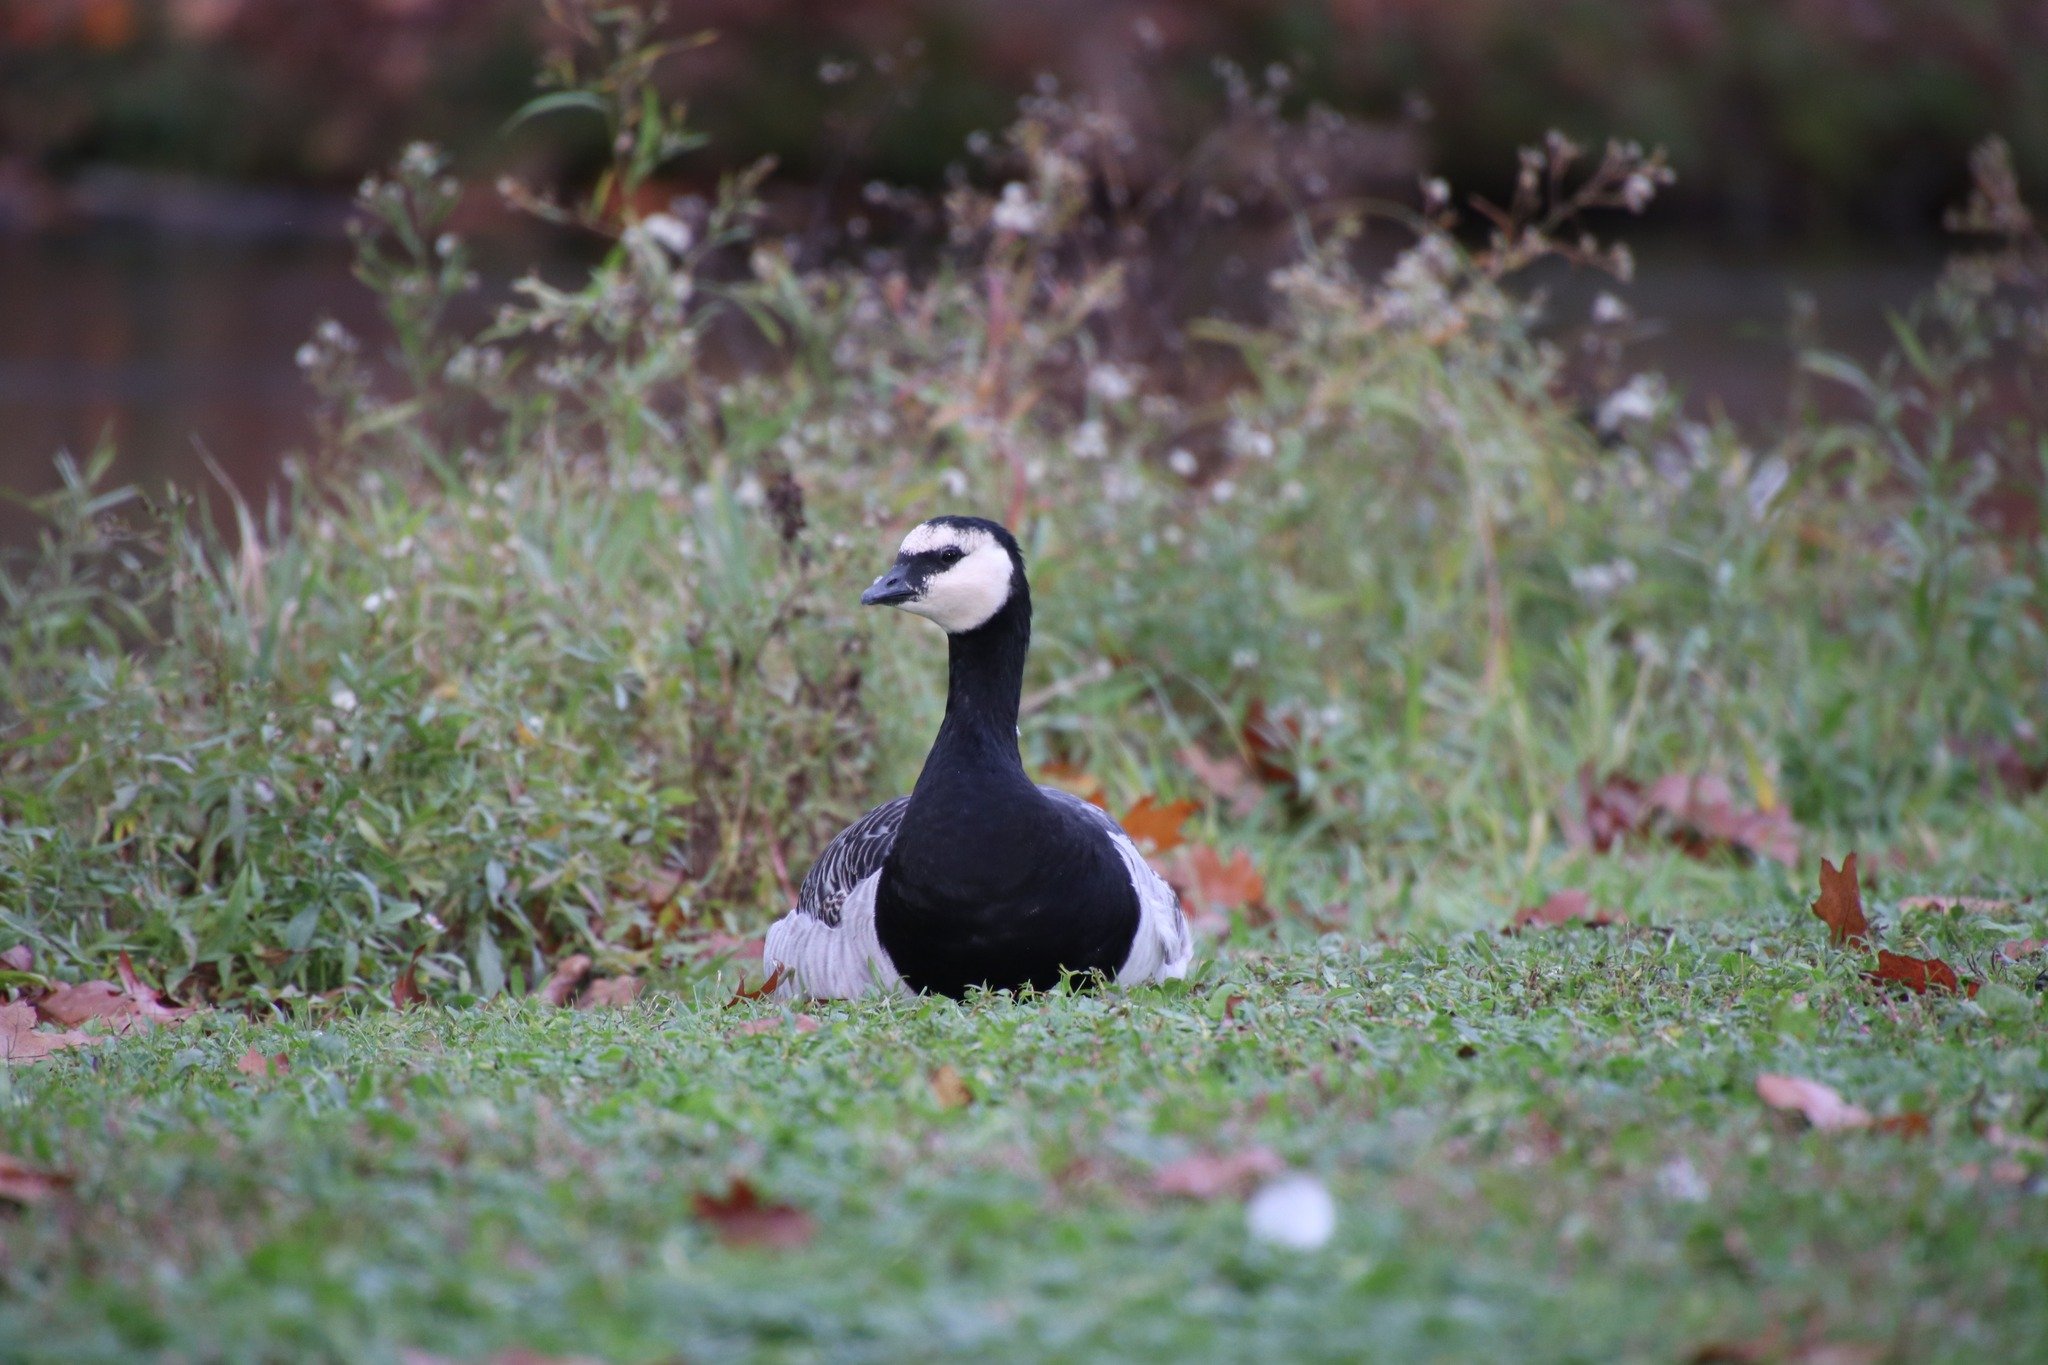 📣 Exciting News! We're participating in the Give Local Fundraiser from April 24th-25th. Join us in supporting our mission to conserve waterfowl and their habitats. Every donation makes a difference! 🦆 

Pictured: Barnacle goose

#GiveLocal #RipleyW